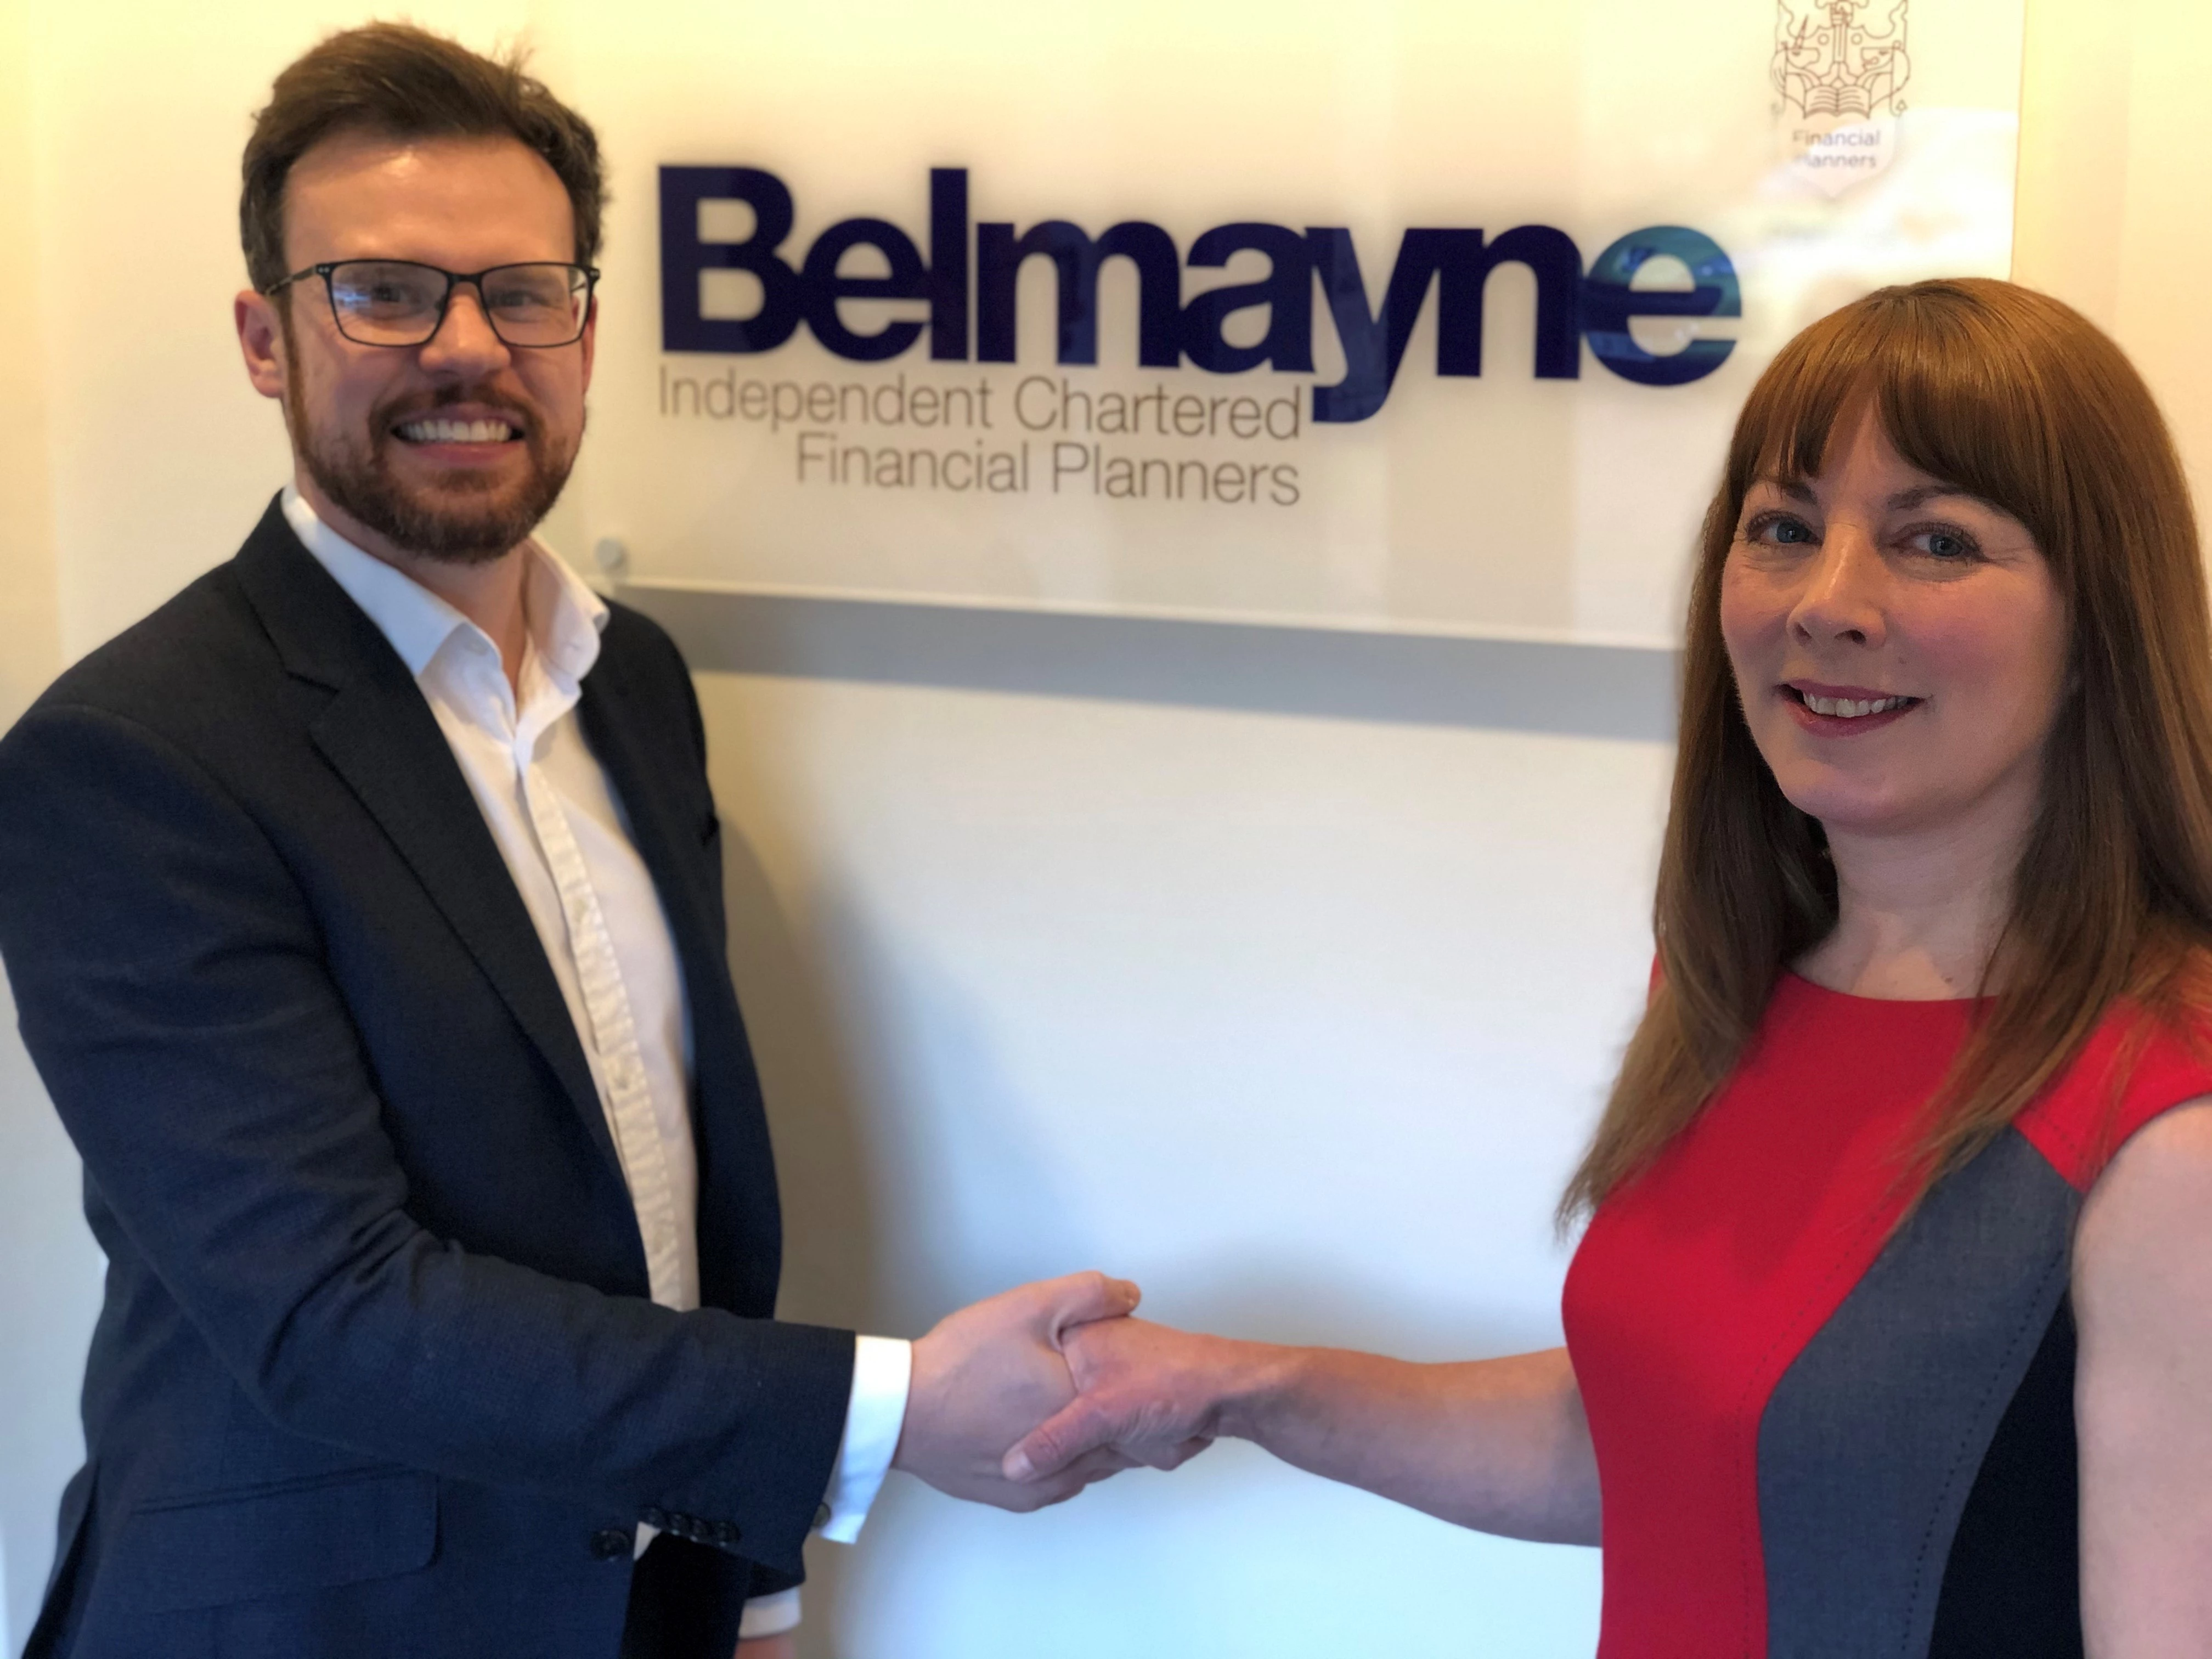 Belmayne partner, Martin Birch, welcomes Cathy Smith to the firm. 